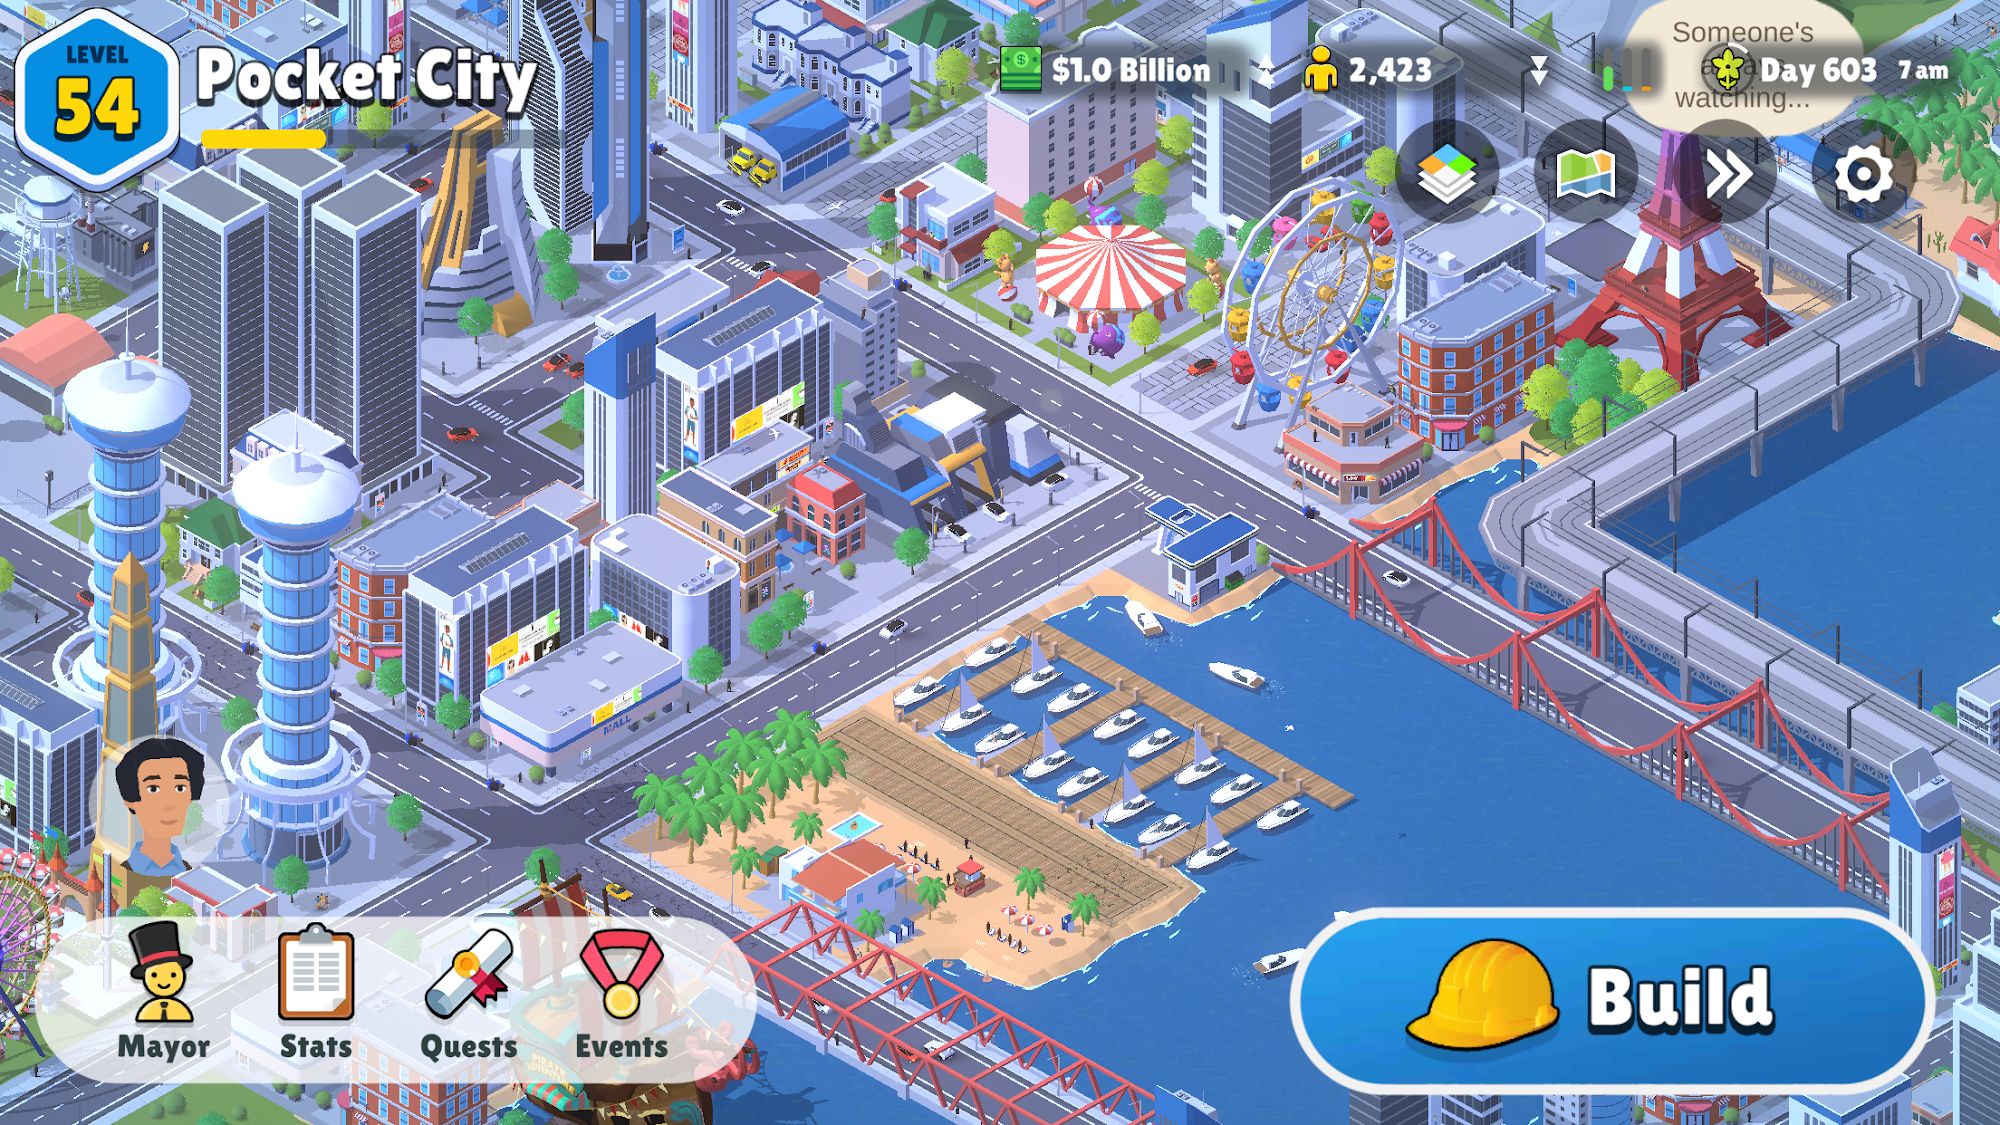 Download Pocket City 2 Android free game.